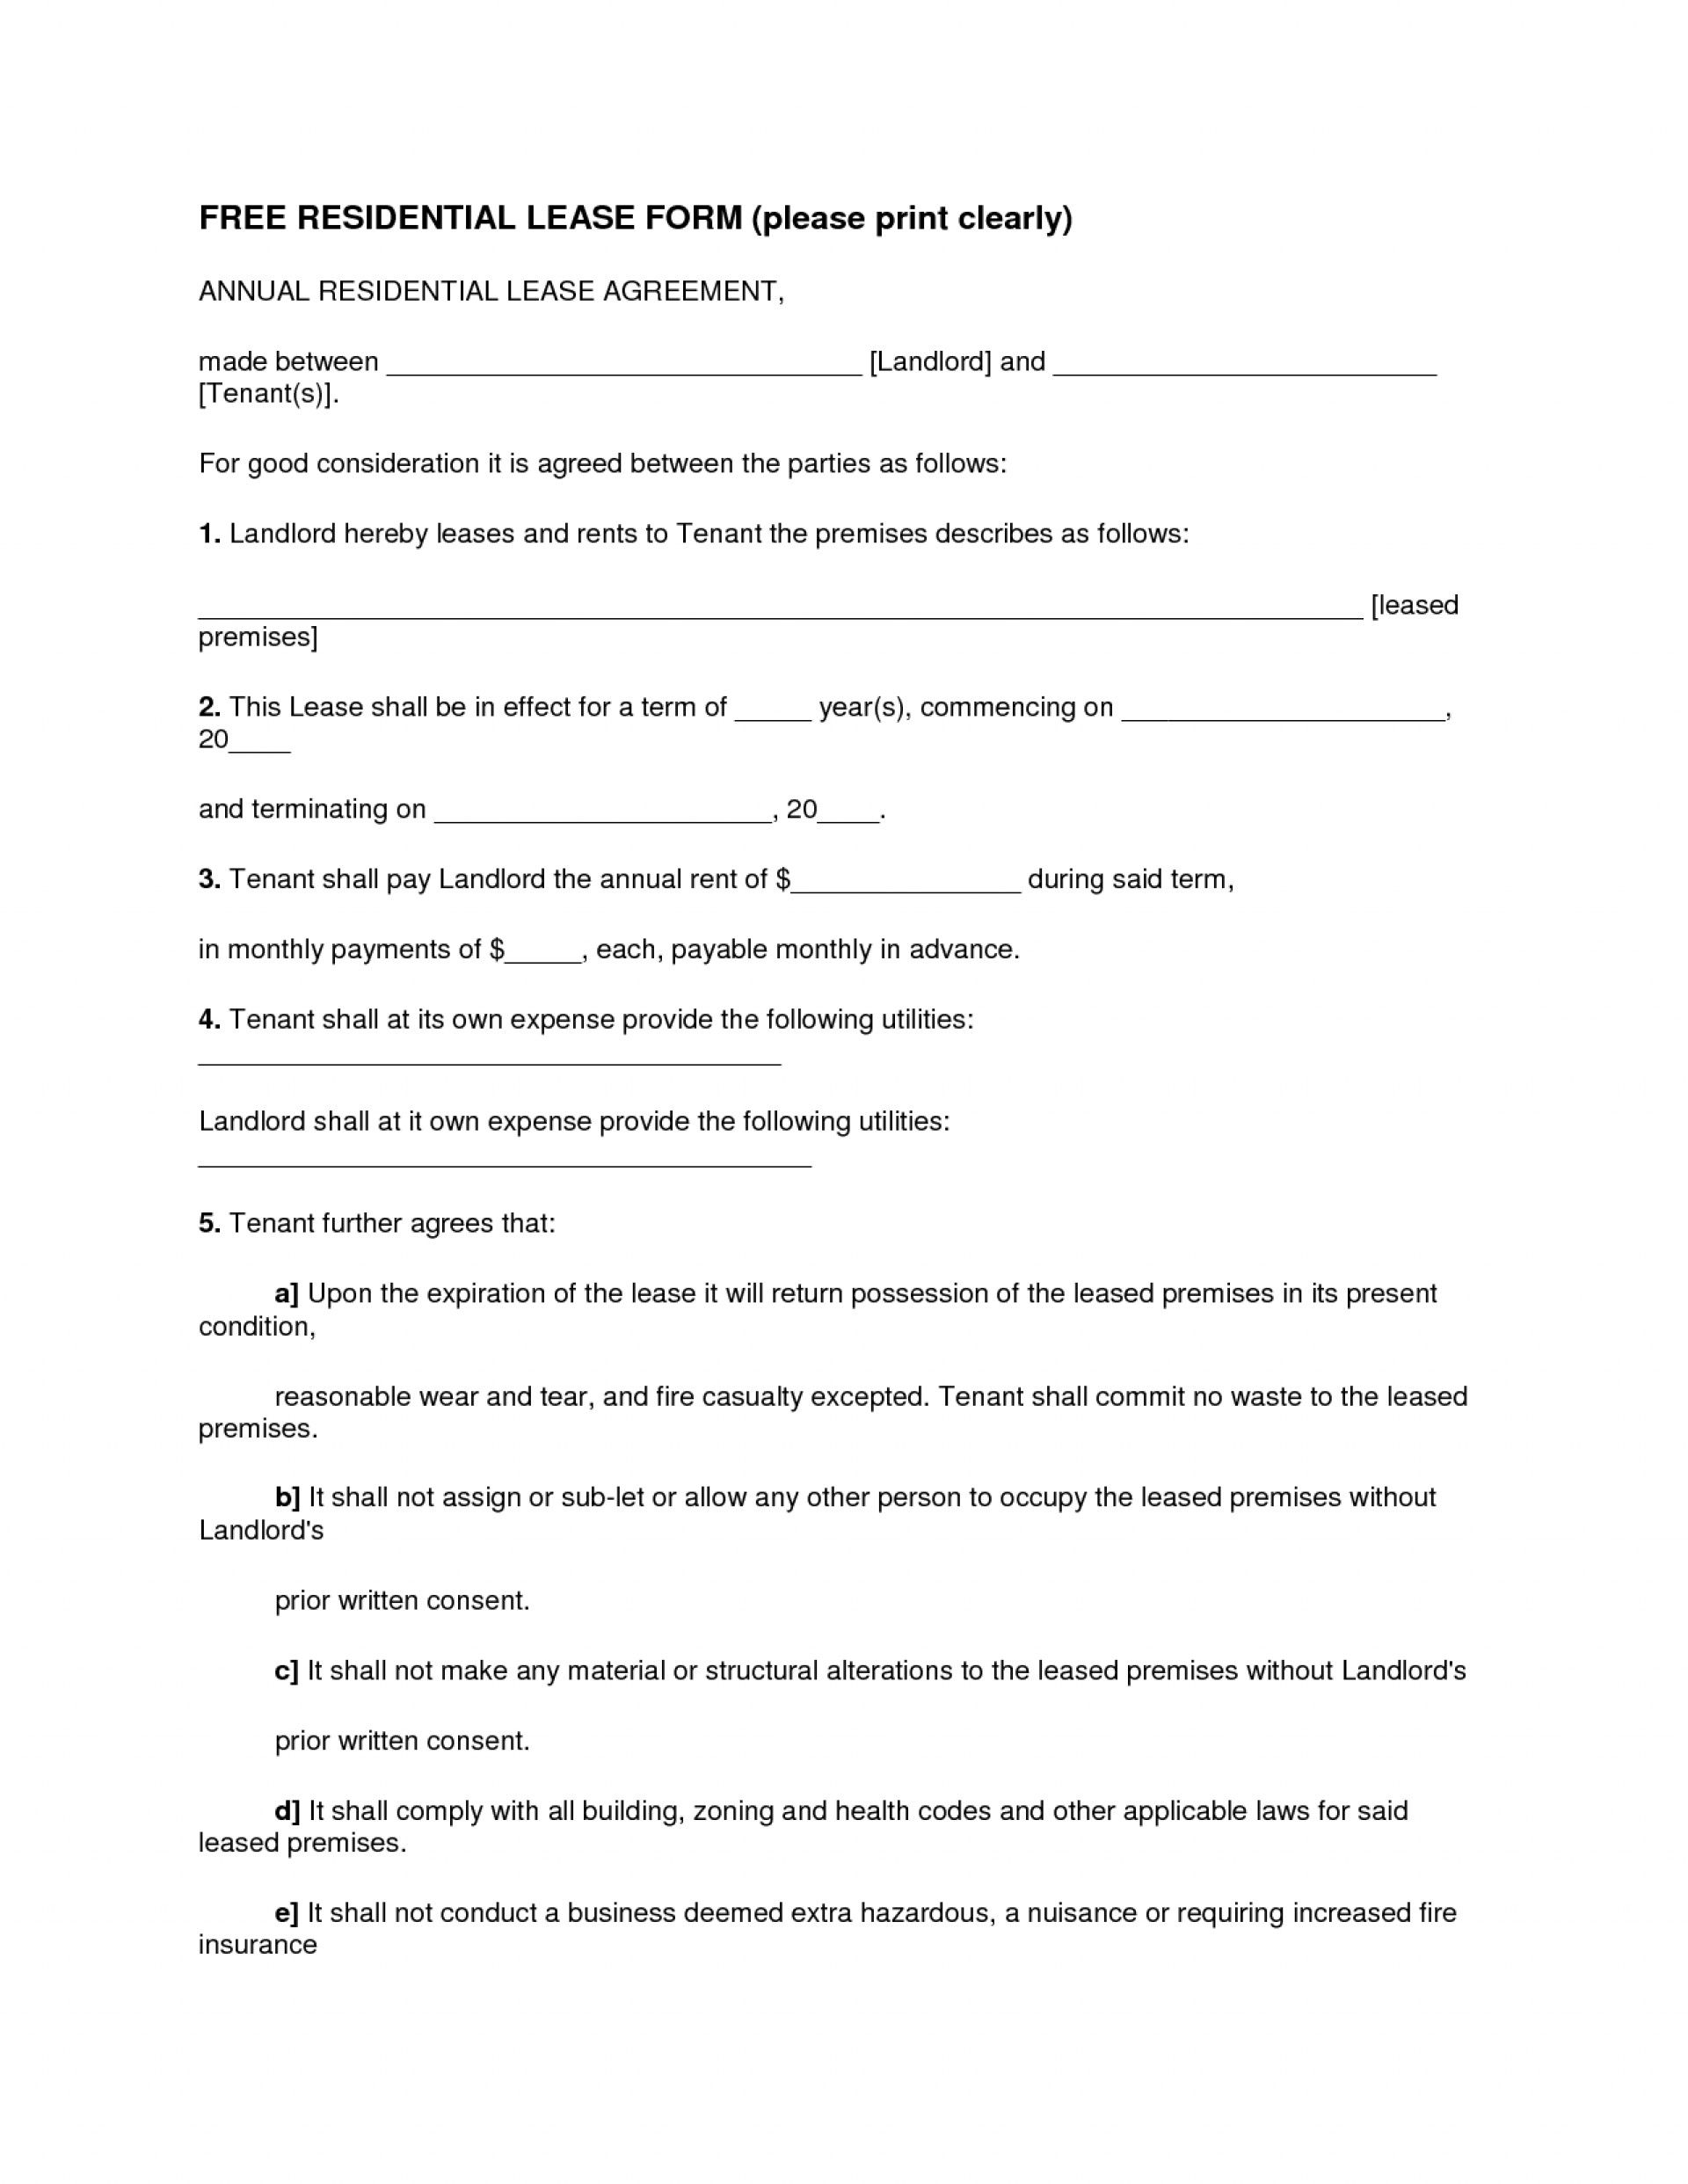 001 Template Ideas Standard Residential Lease Agreement Form - Free Printable Lease Agreement Forms